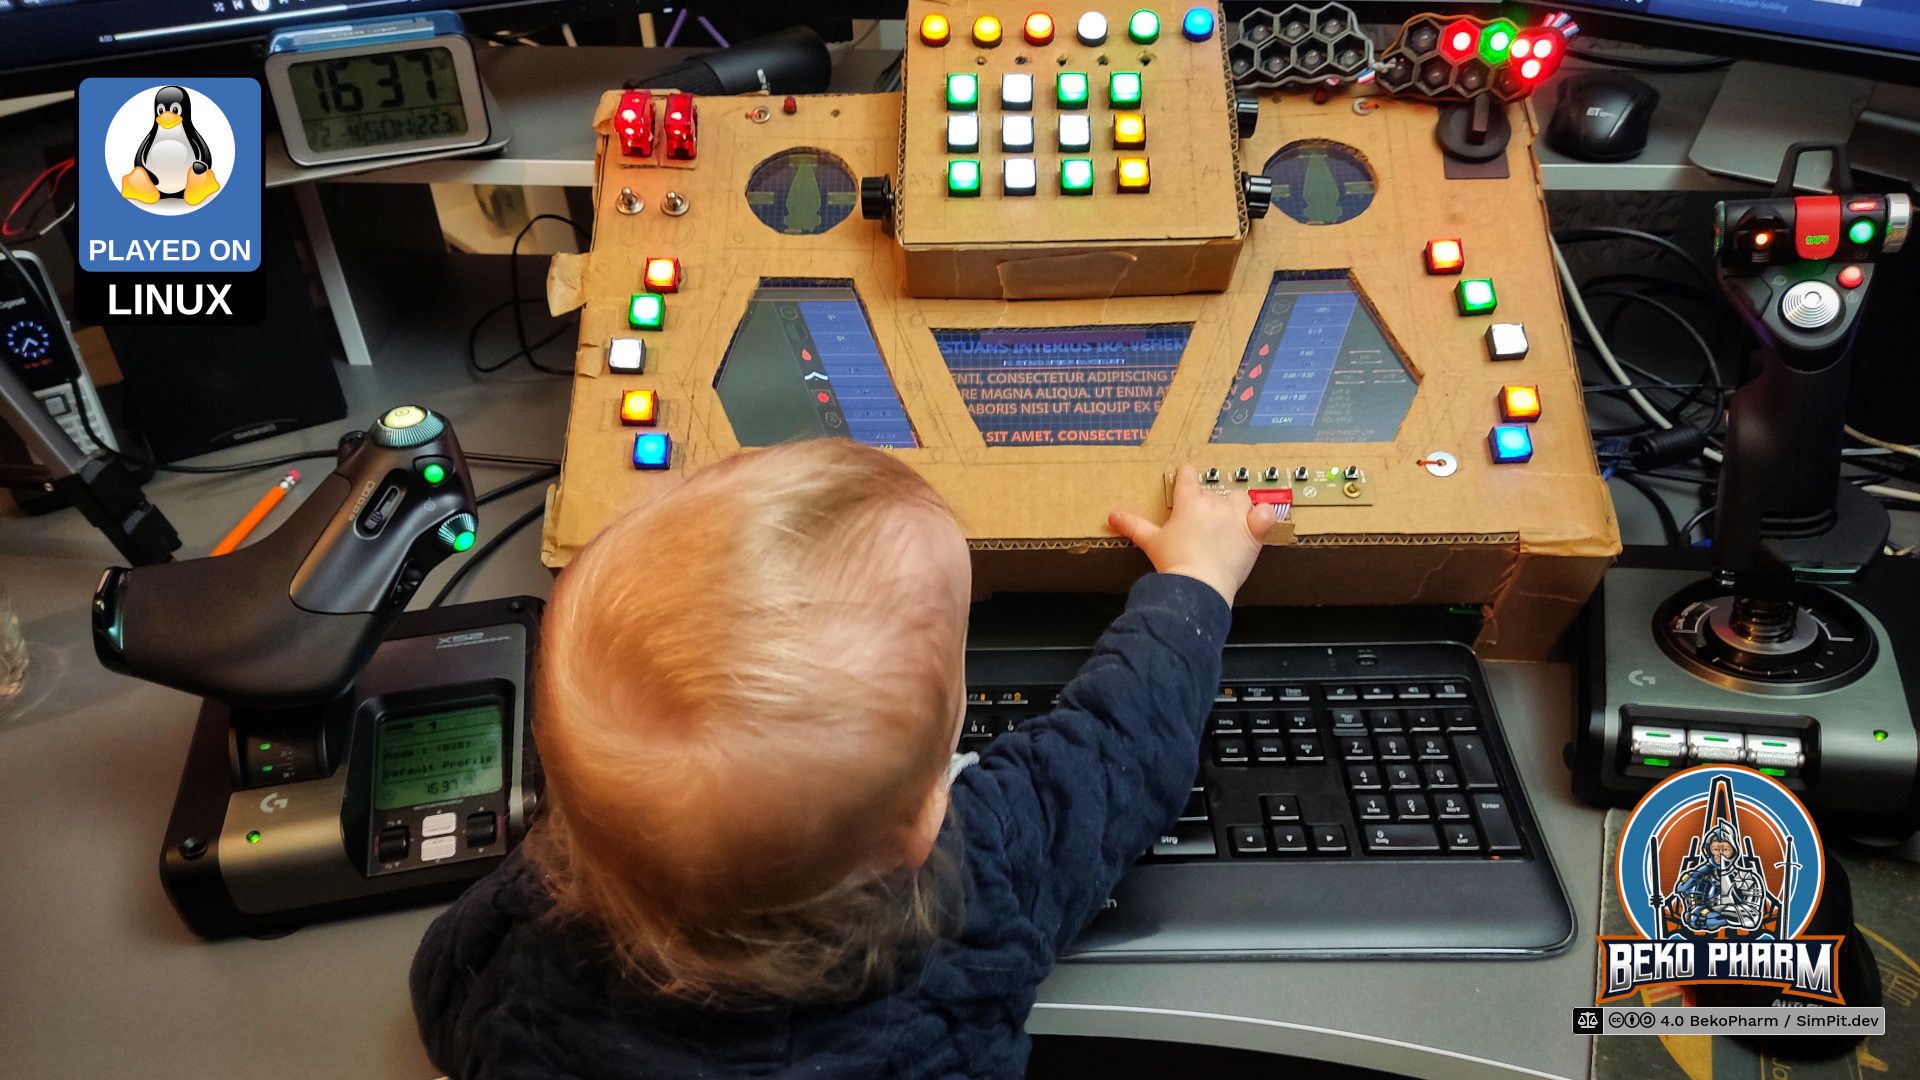 v1 operated by the little one